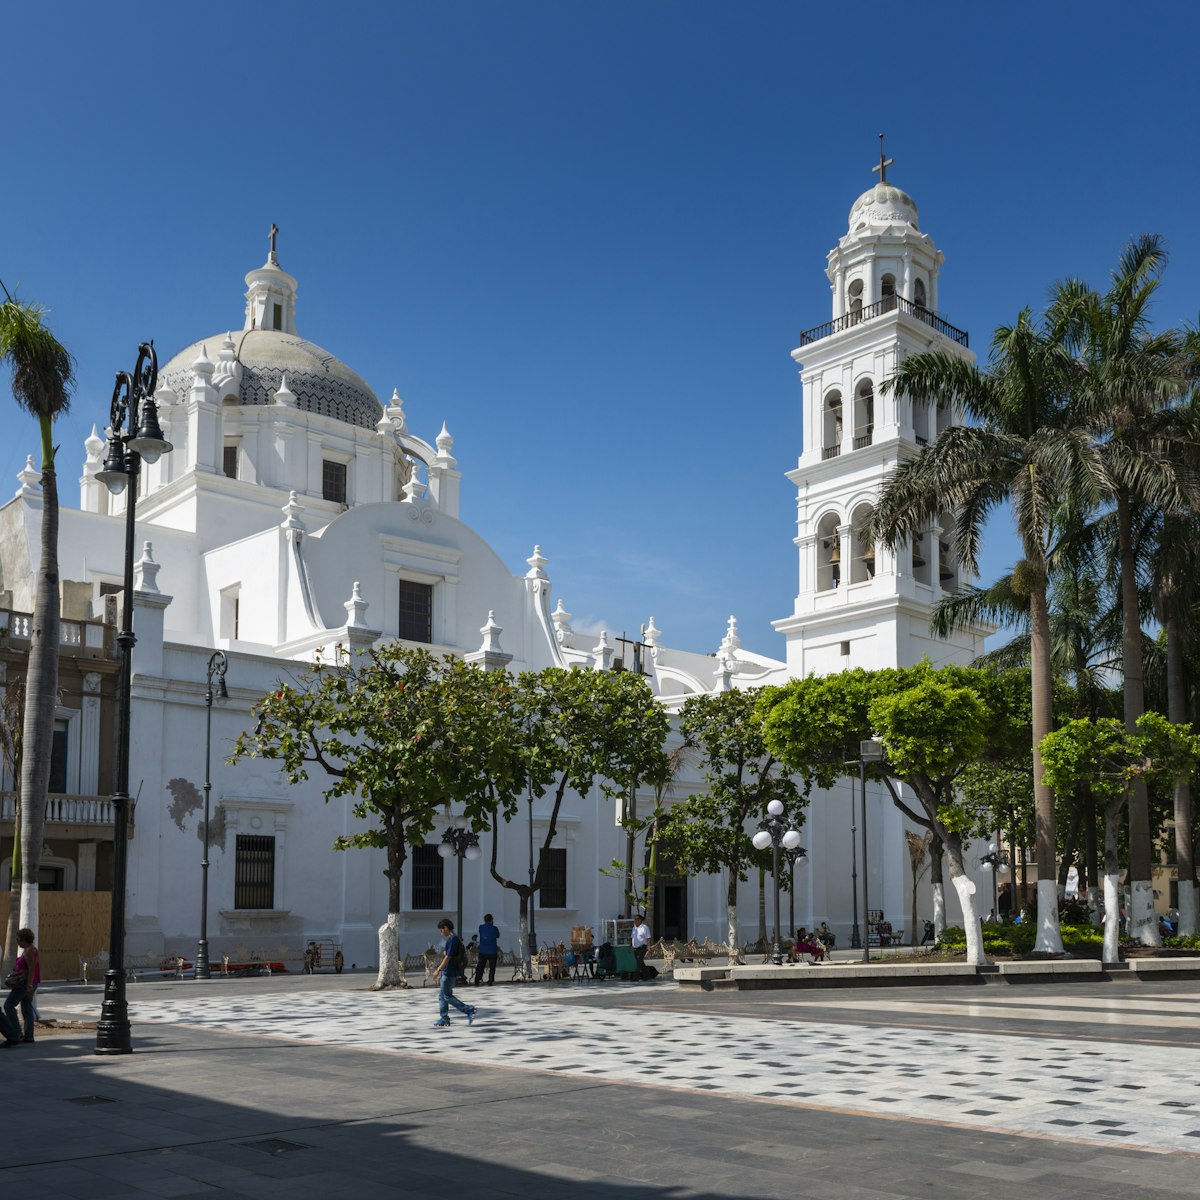 View of the Main Plaza (Zocalo) of the city of Veracruz in Mexico.